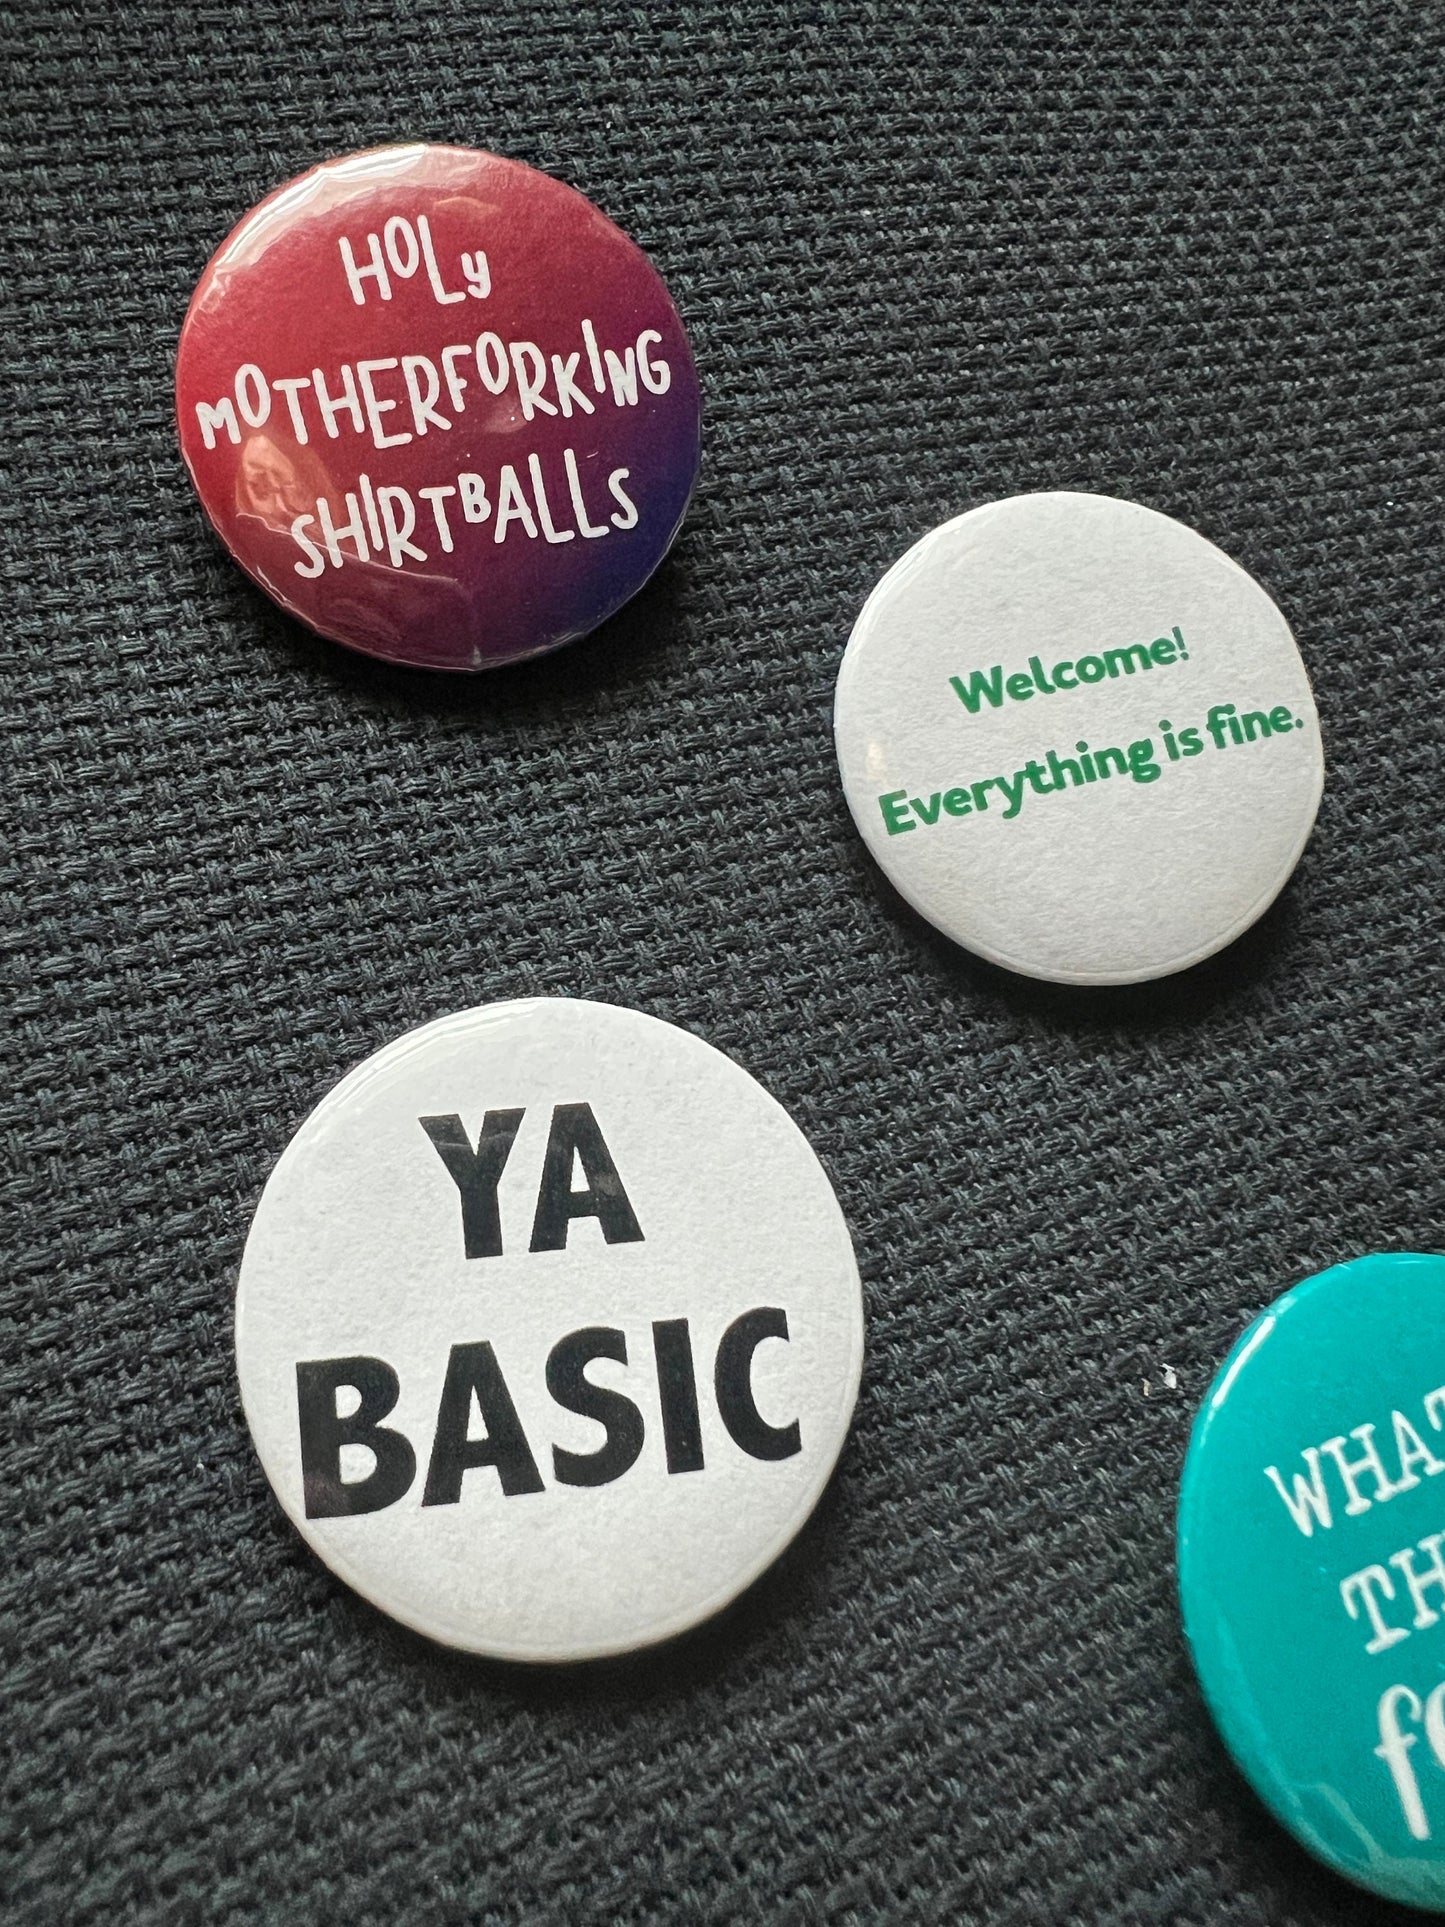 Set of 4 Holy Motherforking Shirtballs, What the FORK, Ya BASIC, Welcome Everything is Fine, Good Place Button Pins